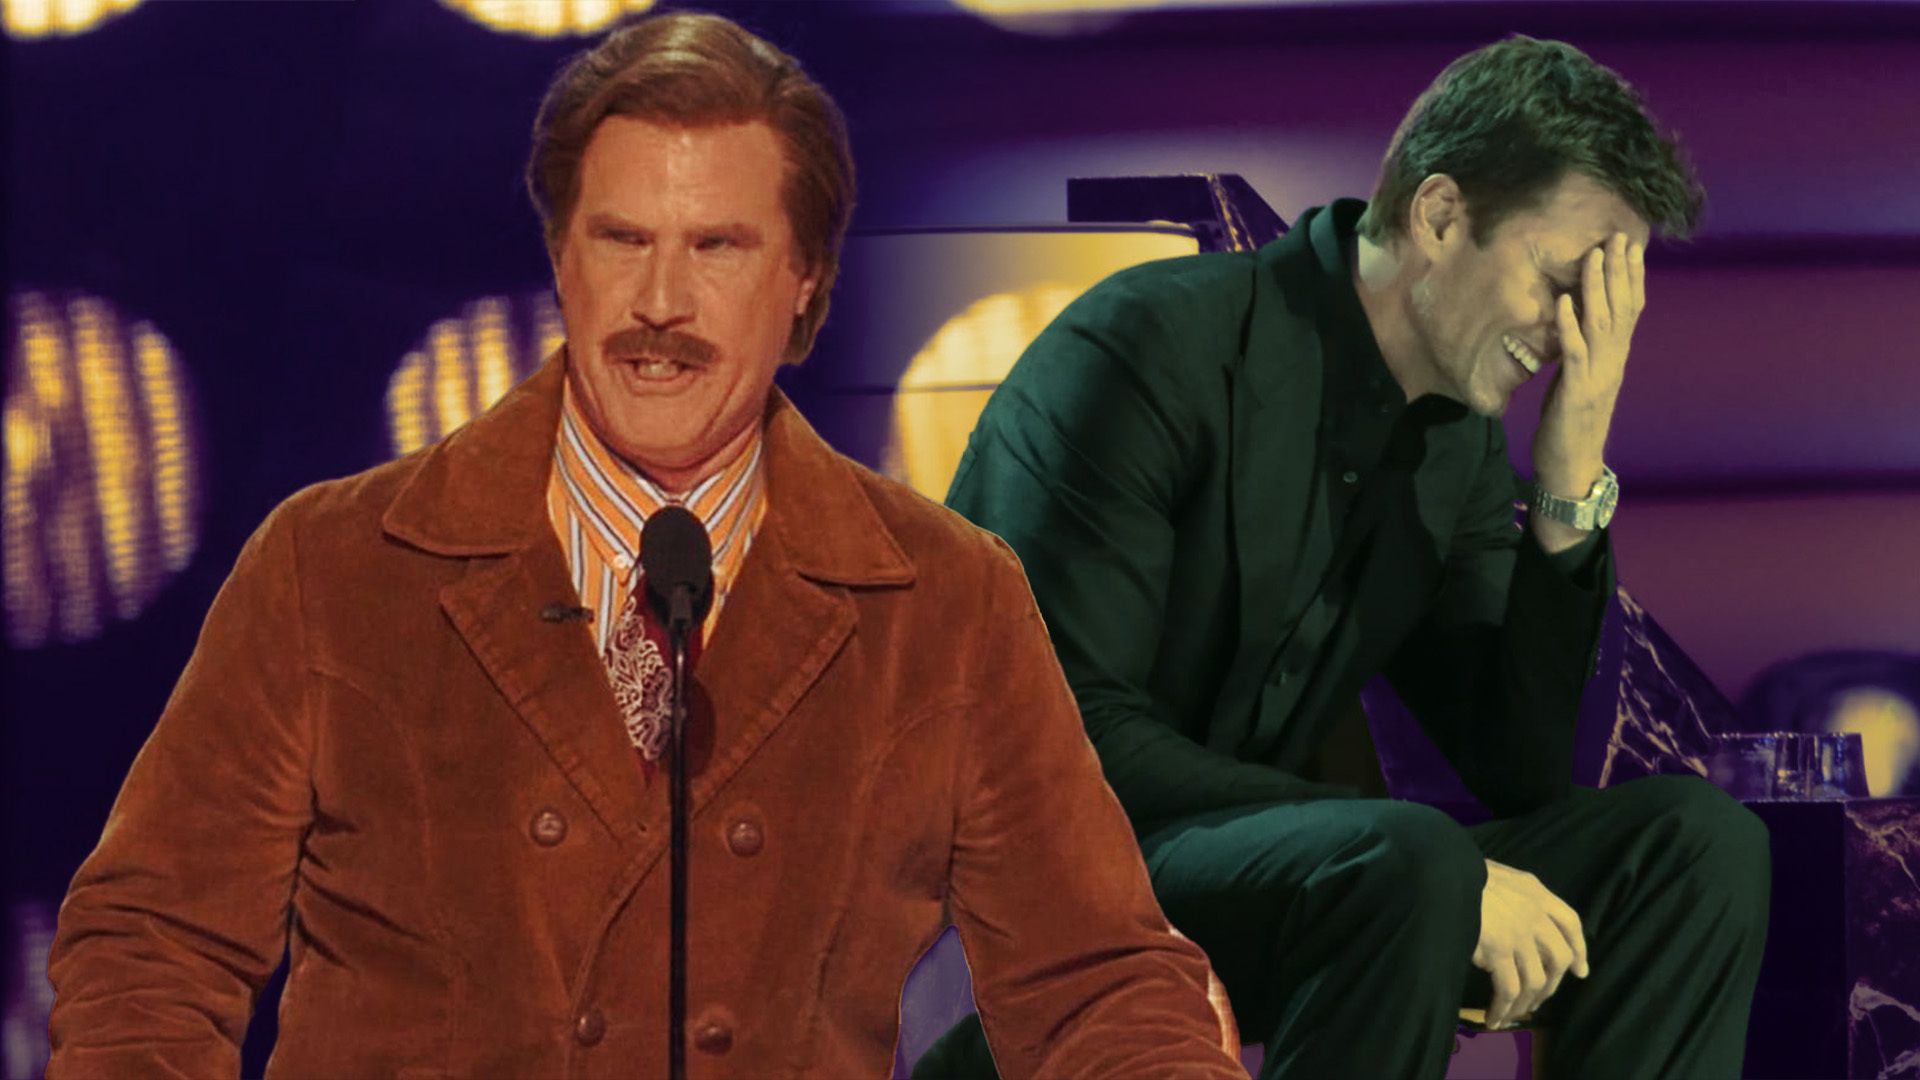 Will Ferrell as Ron Burgundy with Tom Brady laughing at The Roast of Tom Brady